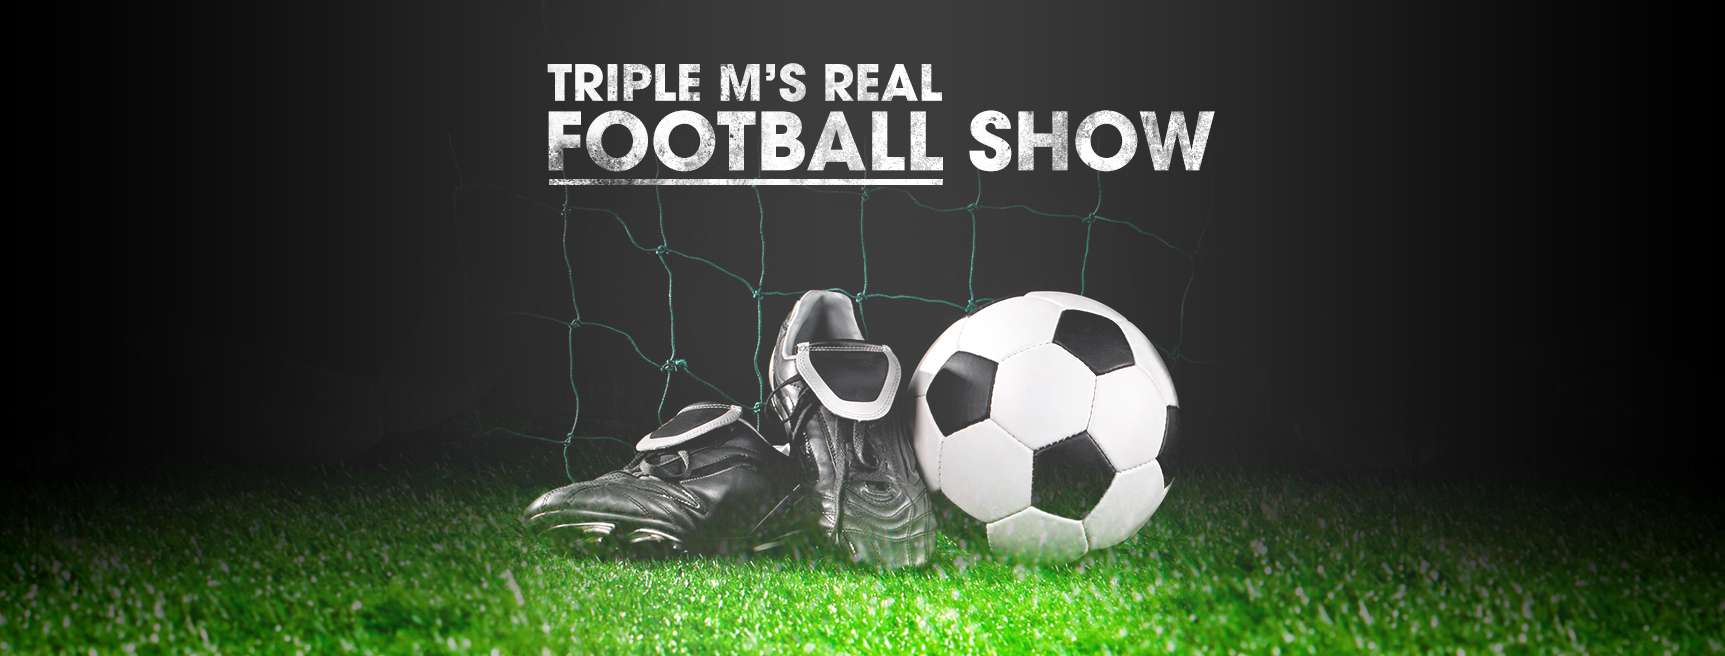 Real Football Show 